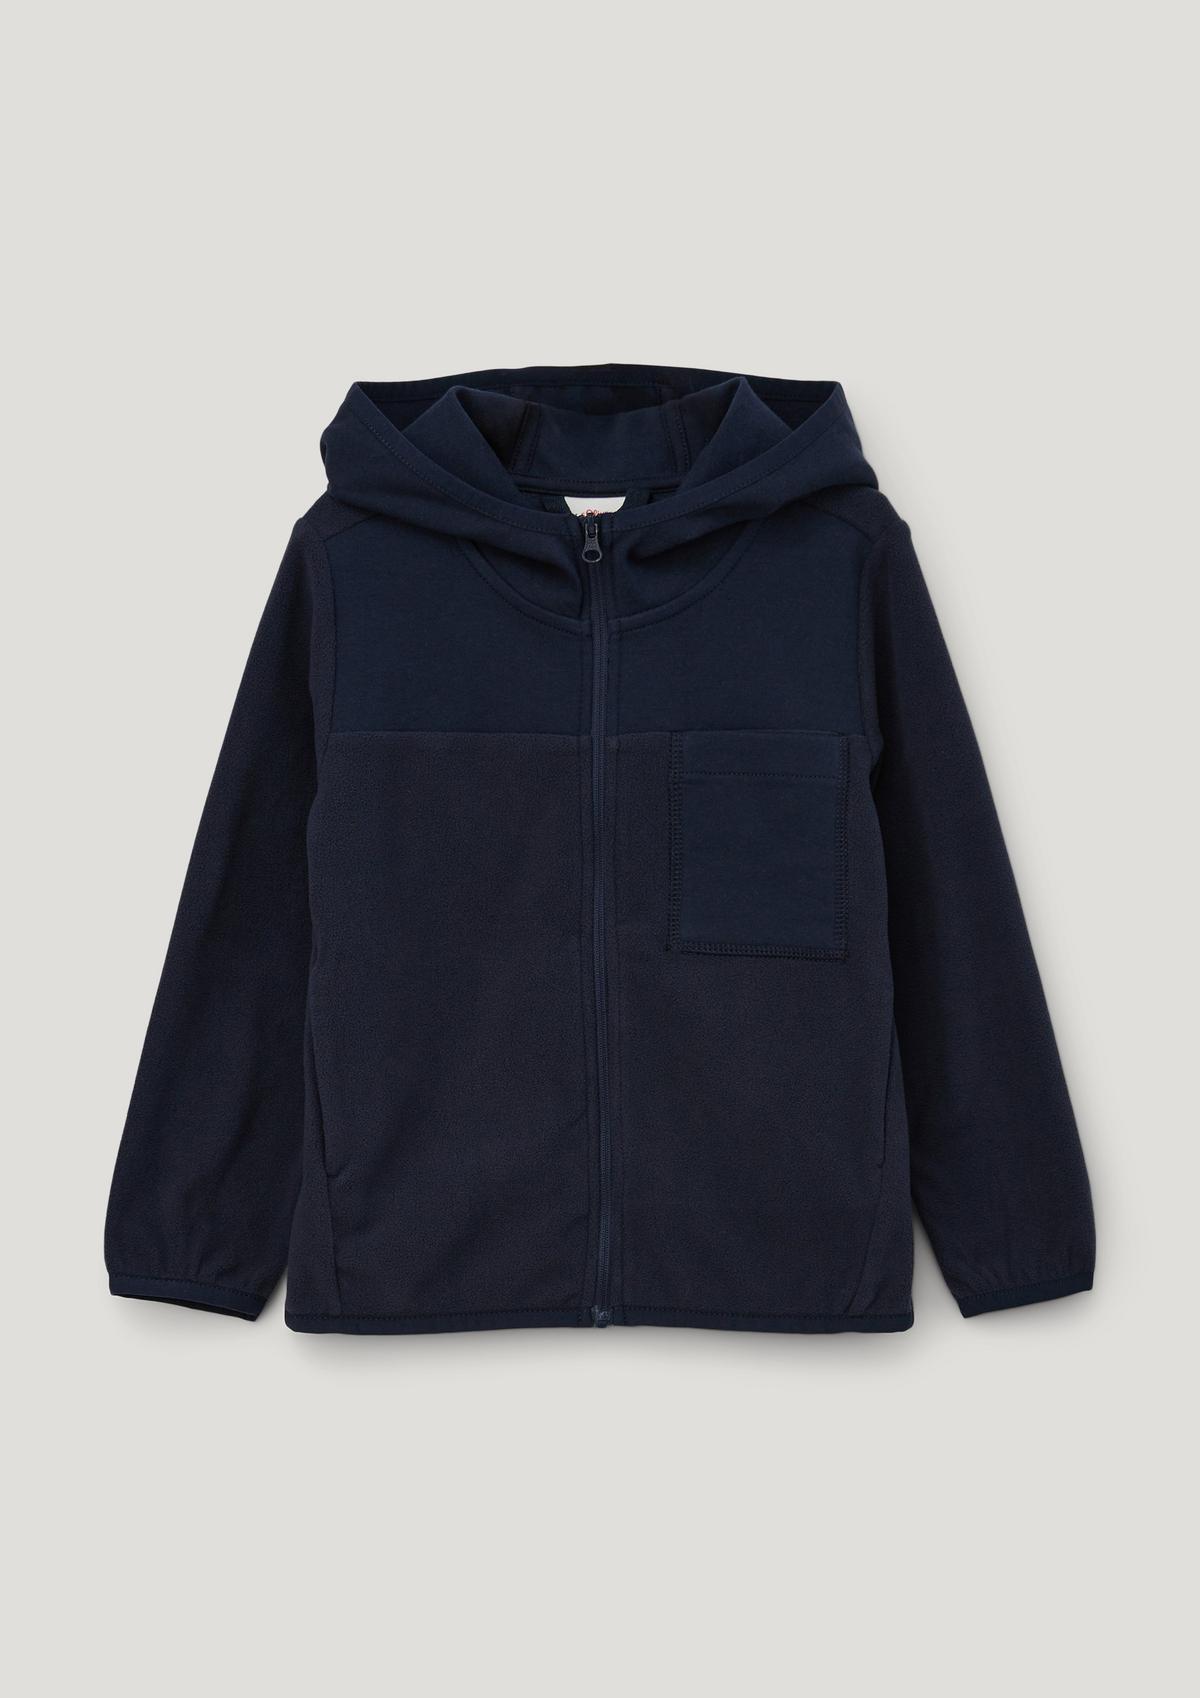 s.Oliver Sweatshirt jacket with a breast pocket